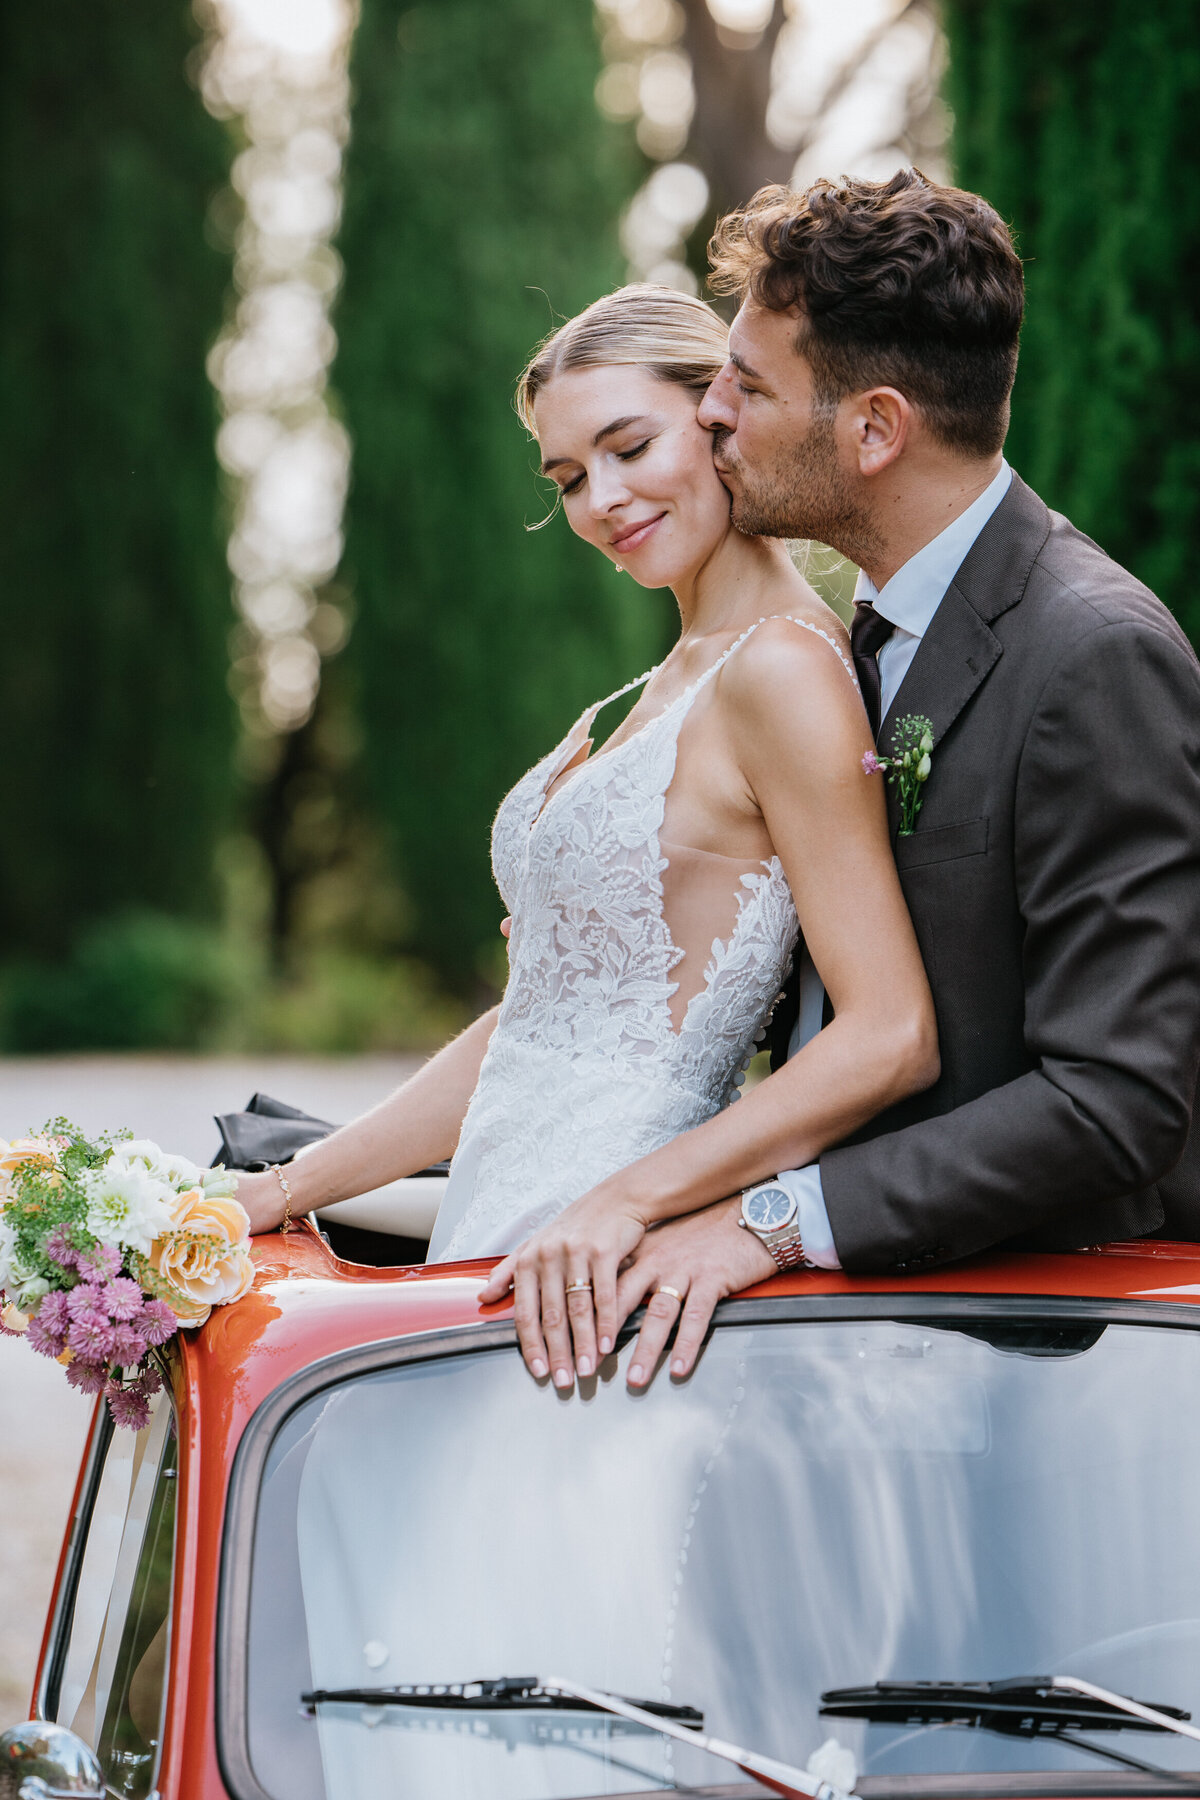 Wedding in Tuscay in Fiat old school car with bouquet